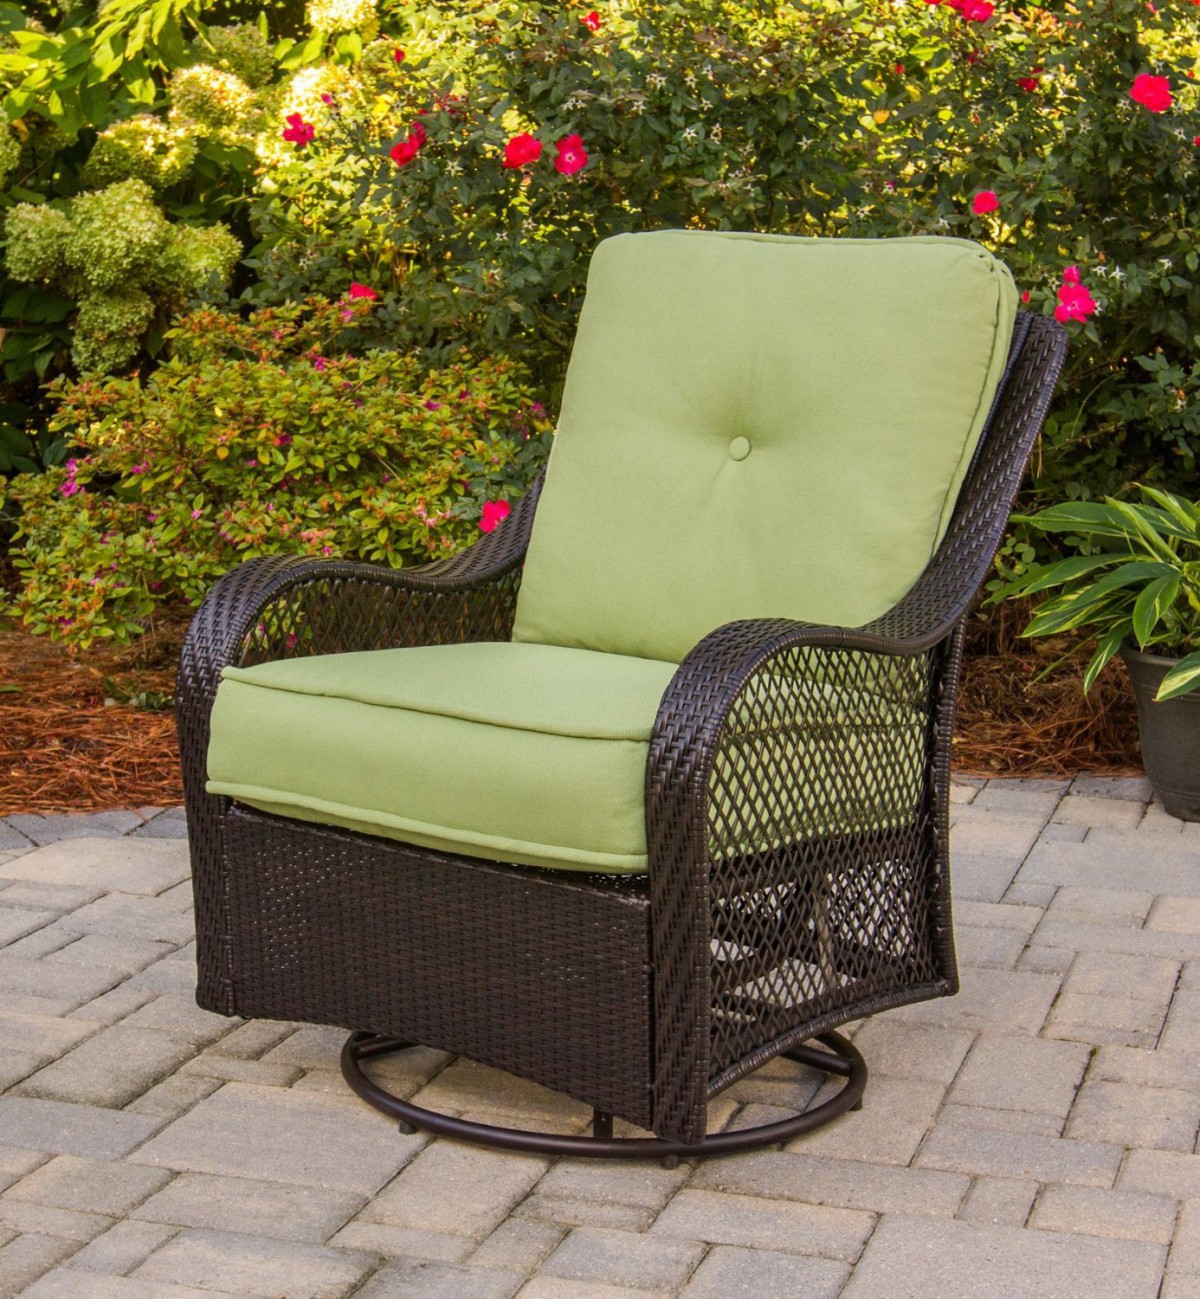 Hanover Orleans 4 Piece Outdoor Conversation Set with Swivel Glider Chairs